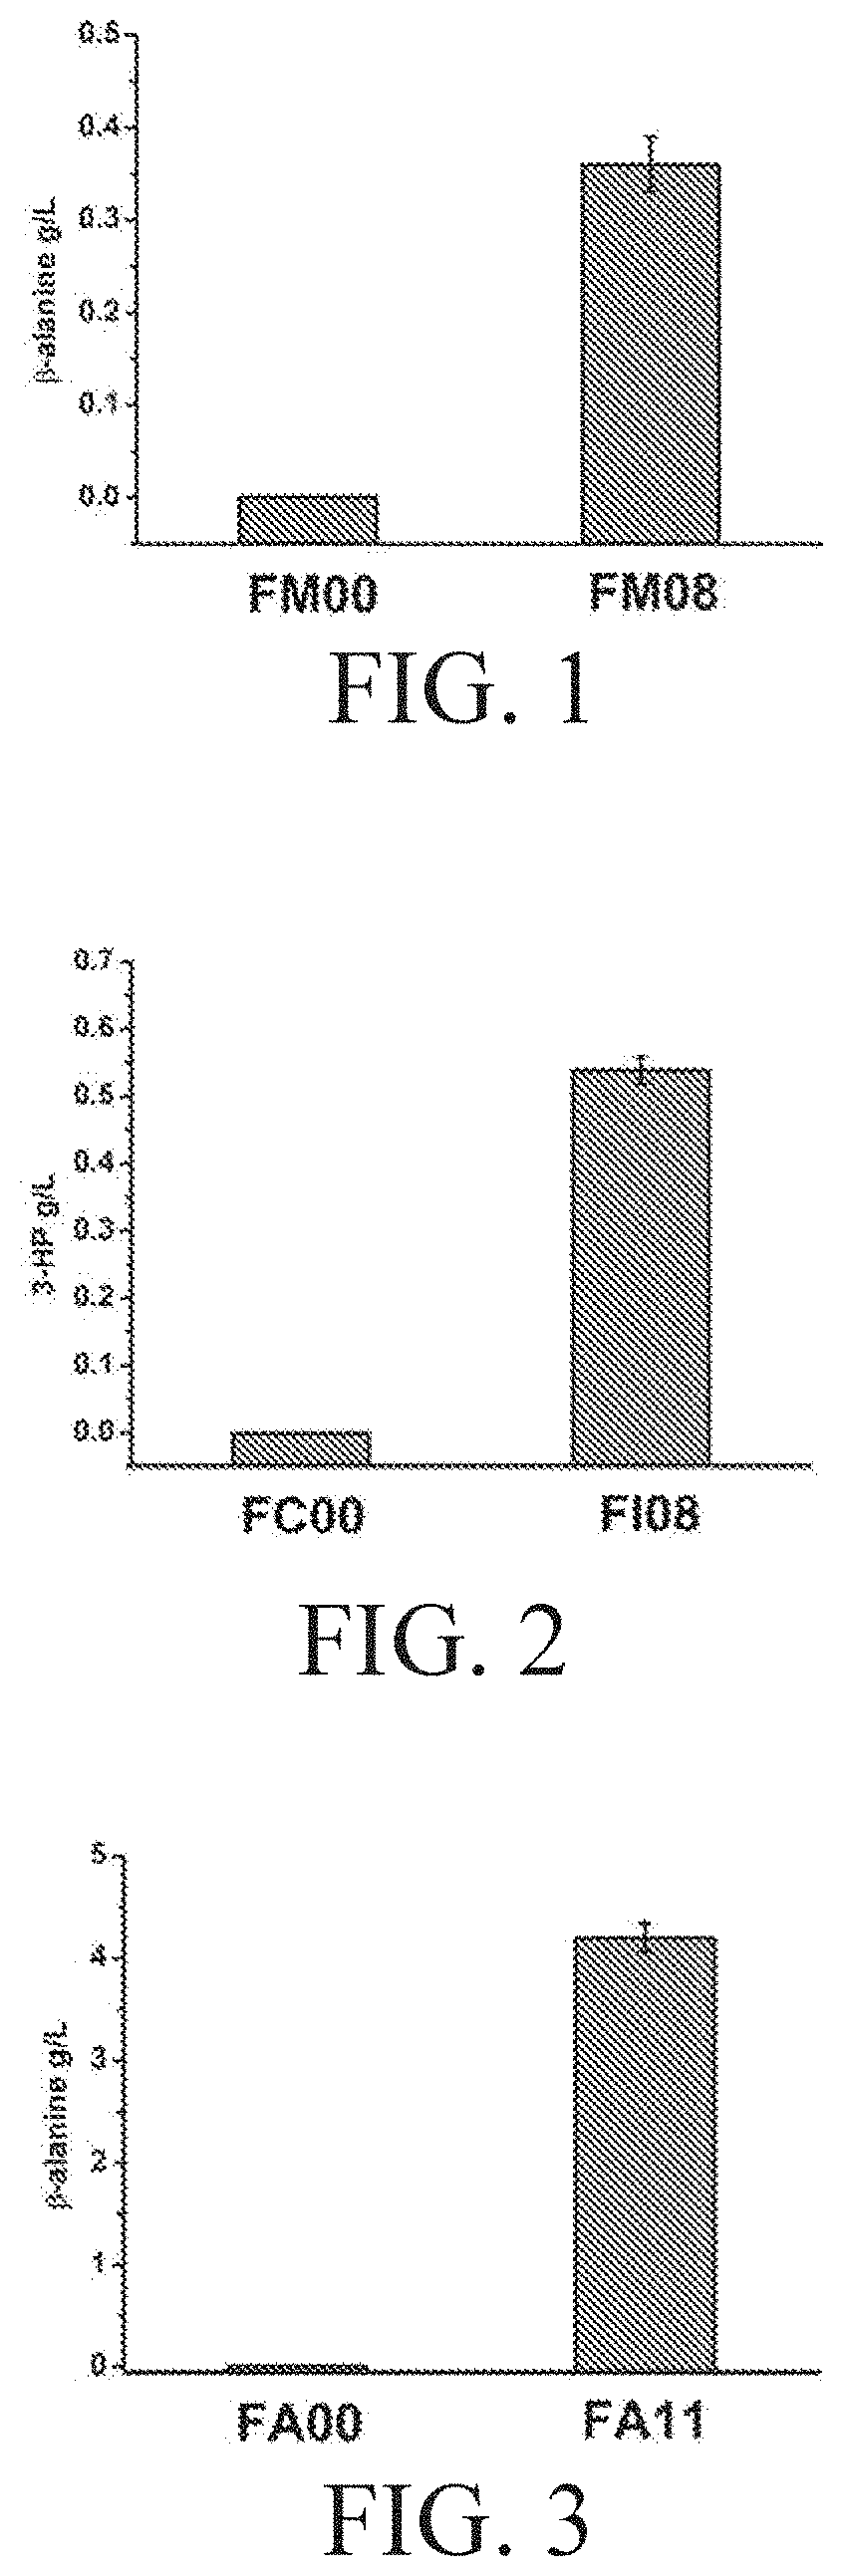 Recombinant bacteria for producing 3-hydroxy propionic acid, preparation method therefor, and applications thereof